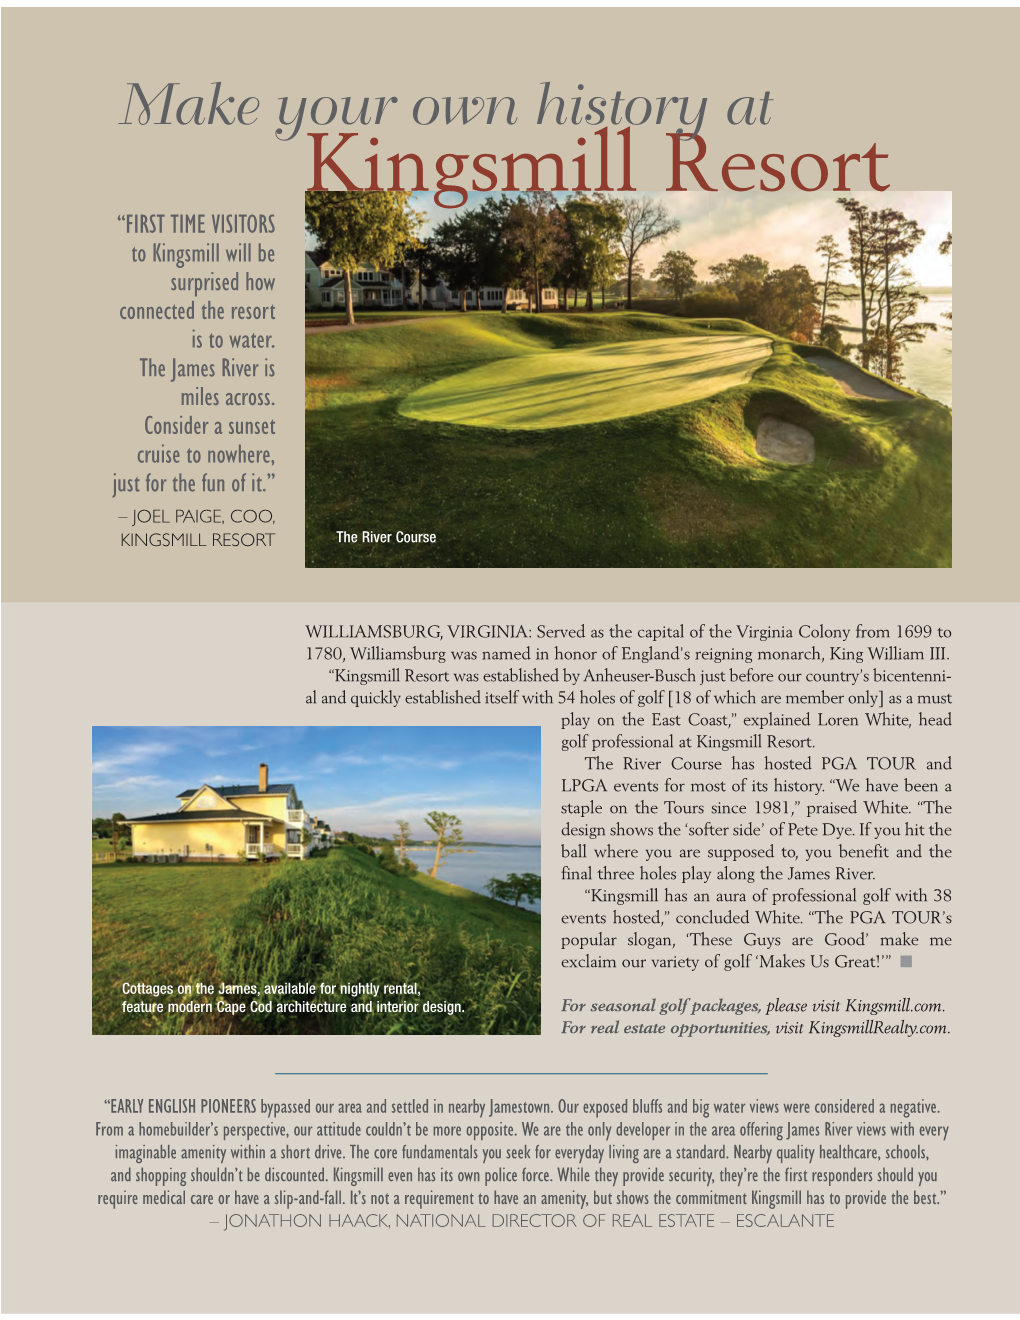 Kingsmill Resort “FIRST TIME VISITORS to Kingsmill Will Be Surprised How Connected the Resort Is to Water